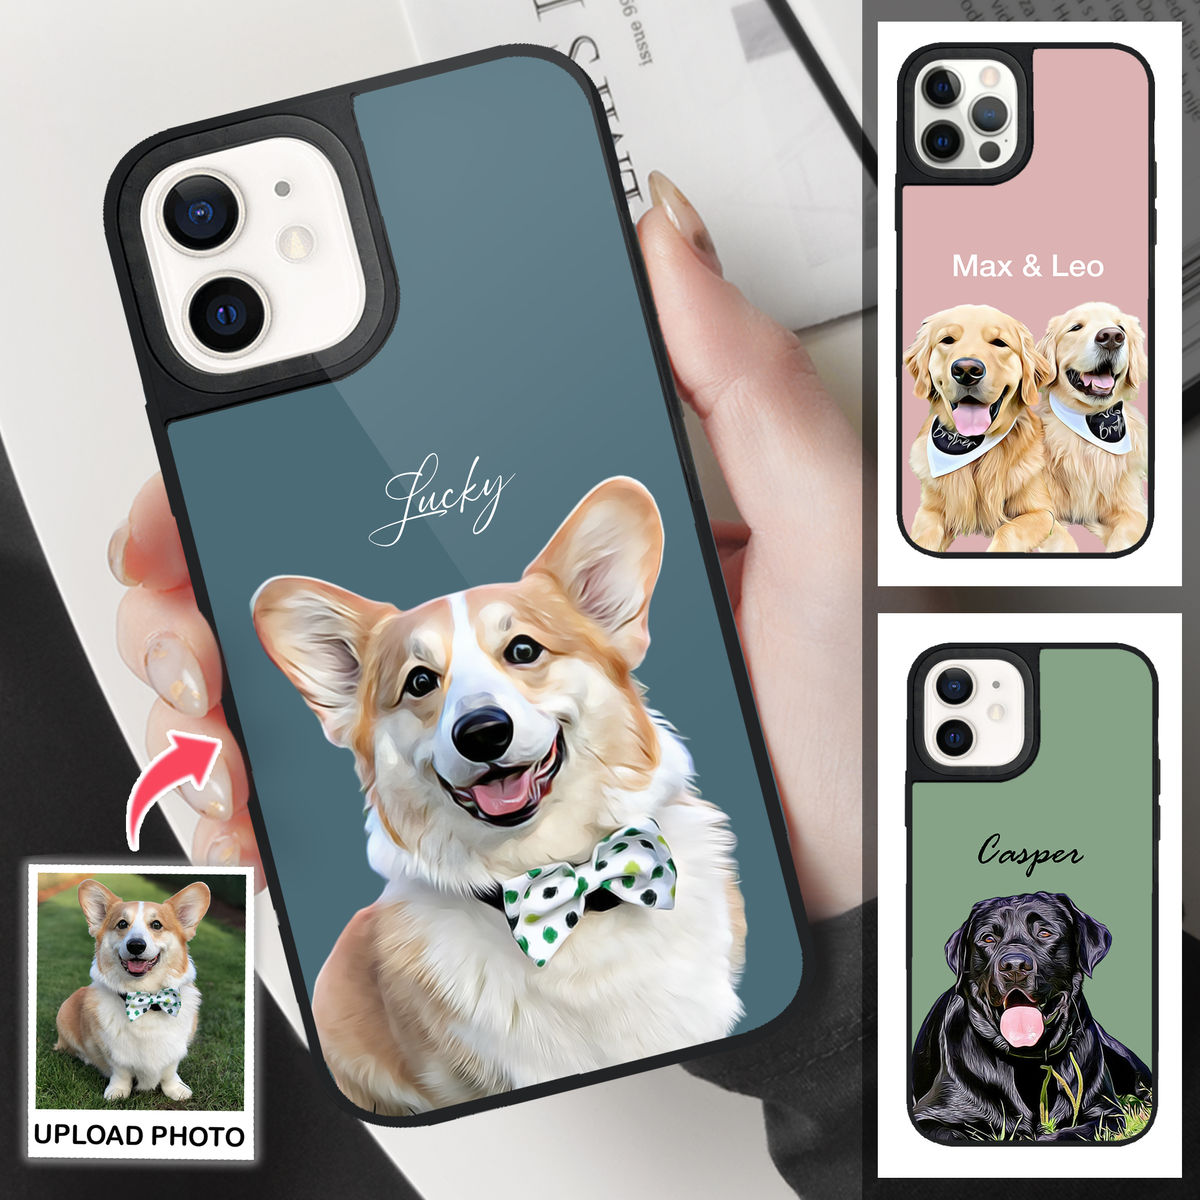 Custom Phone Case From Photo - iPhone Case - Pet Lover Gifts - Dog Portrait - Digital Oil Painting (B)